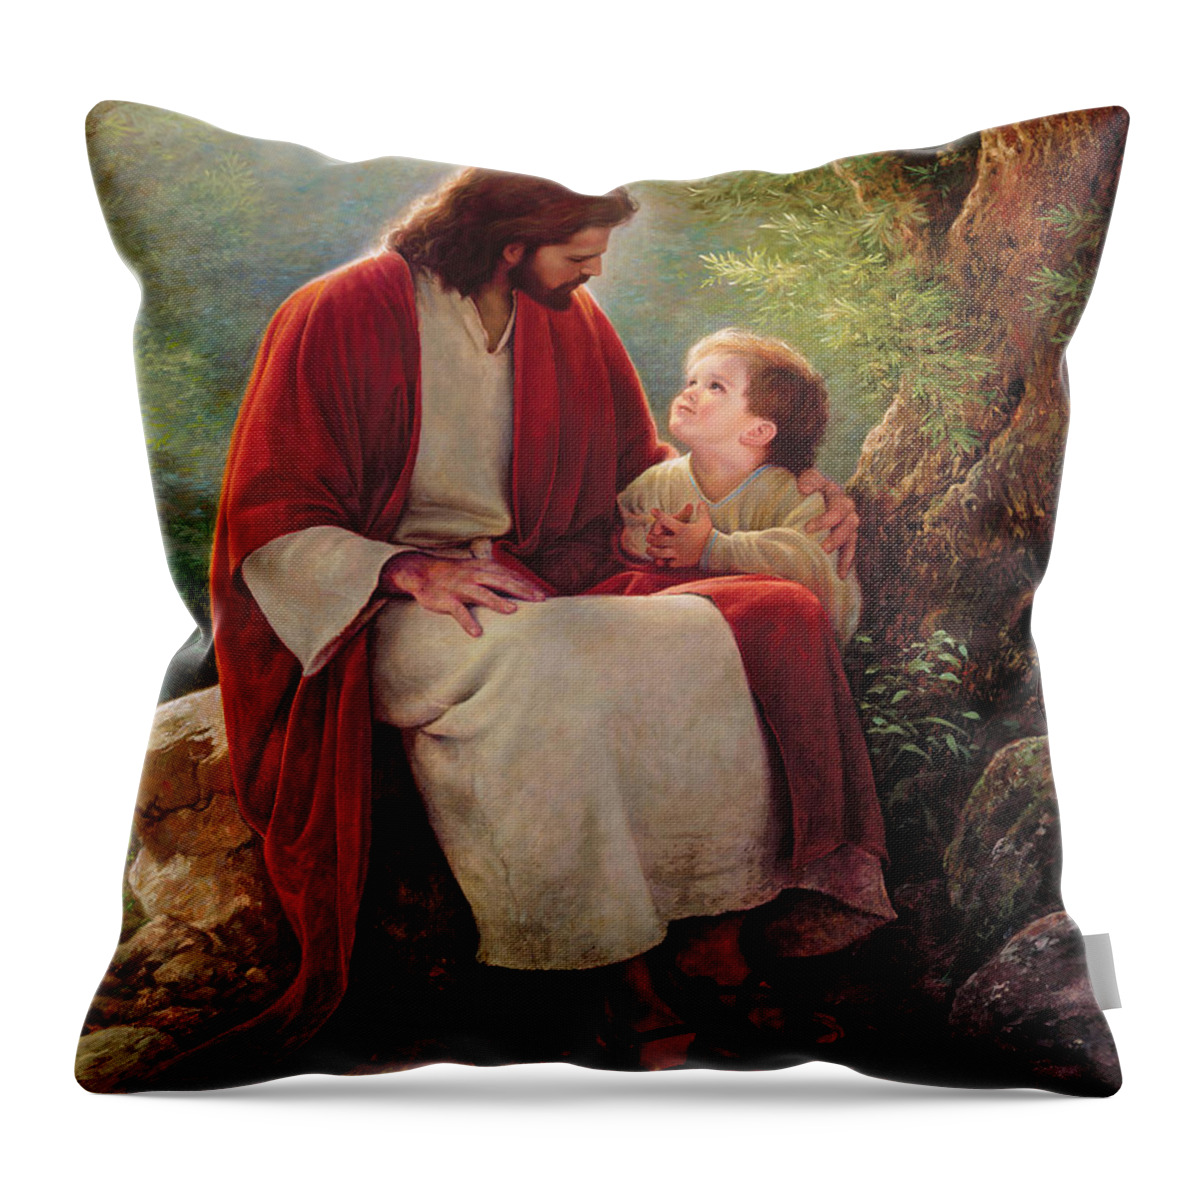 Jesus Throw Pillow featuring the painting In His Light by Greg Olsen